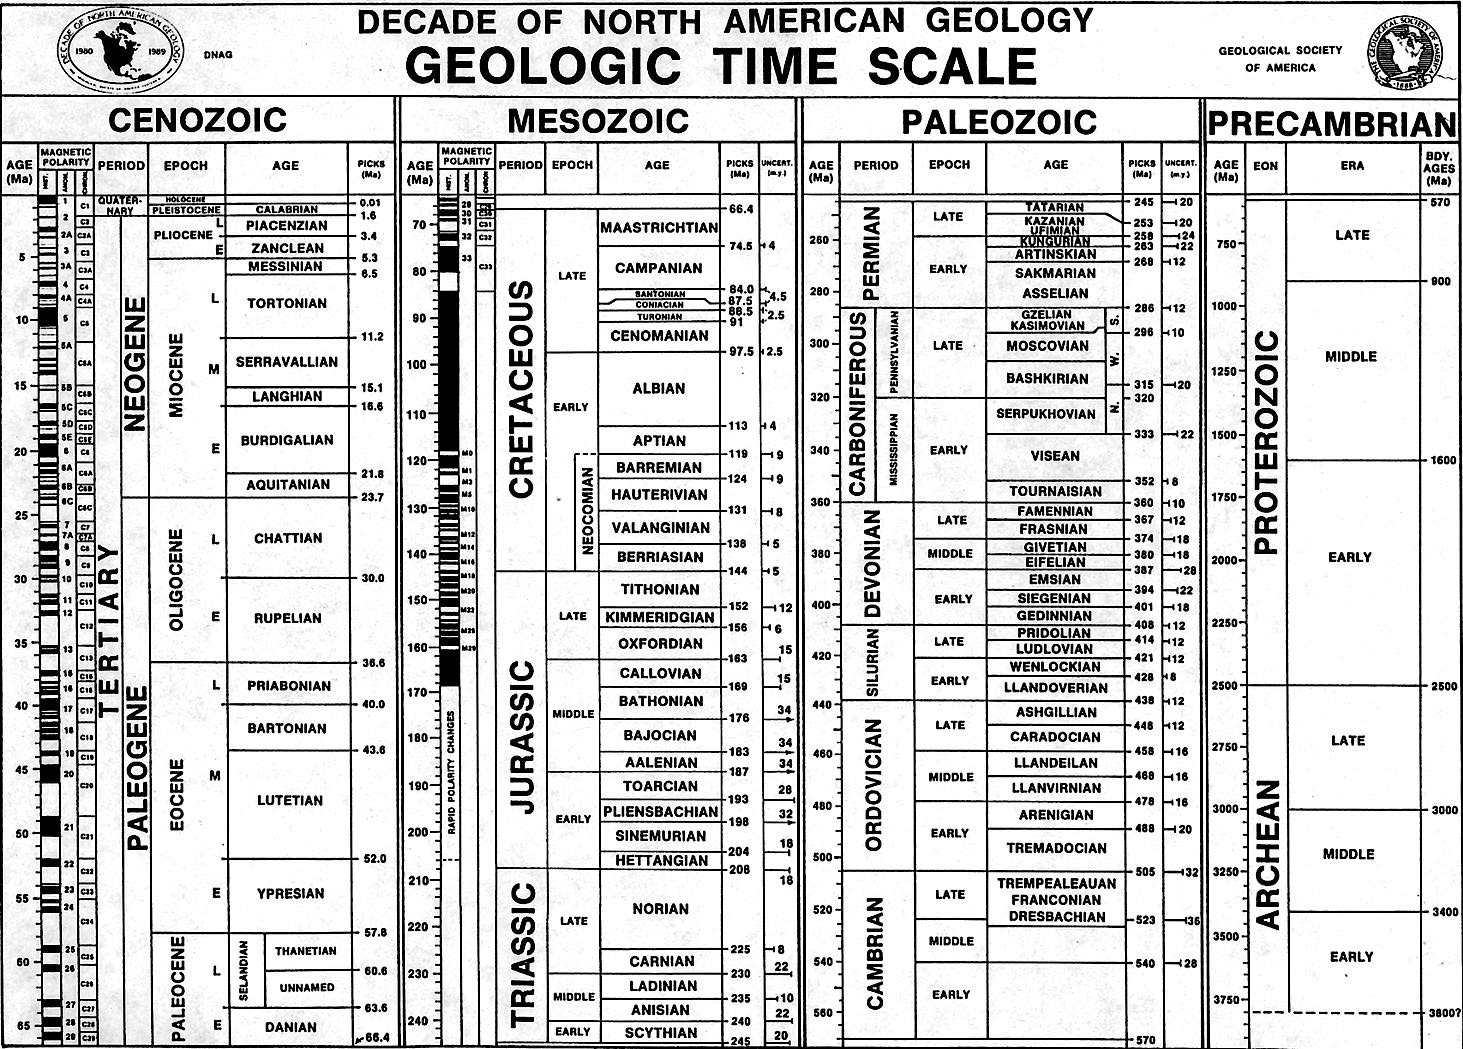 Geologic Time Scale Image